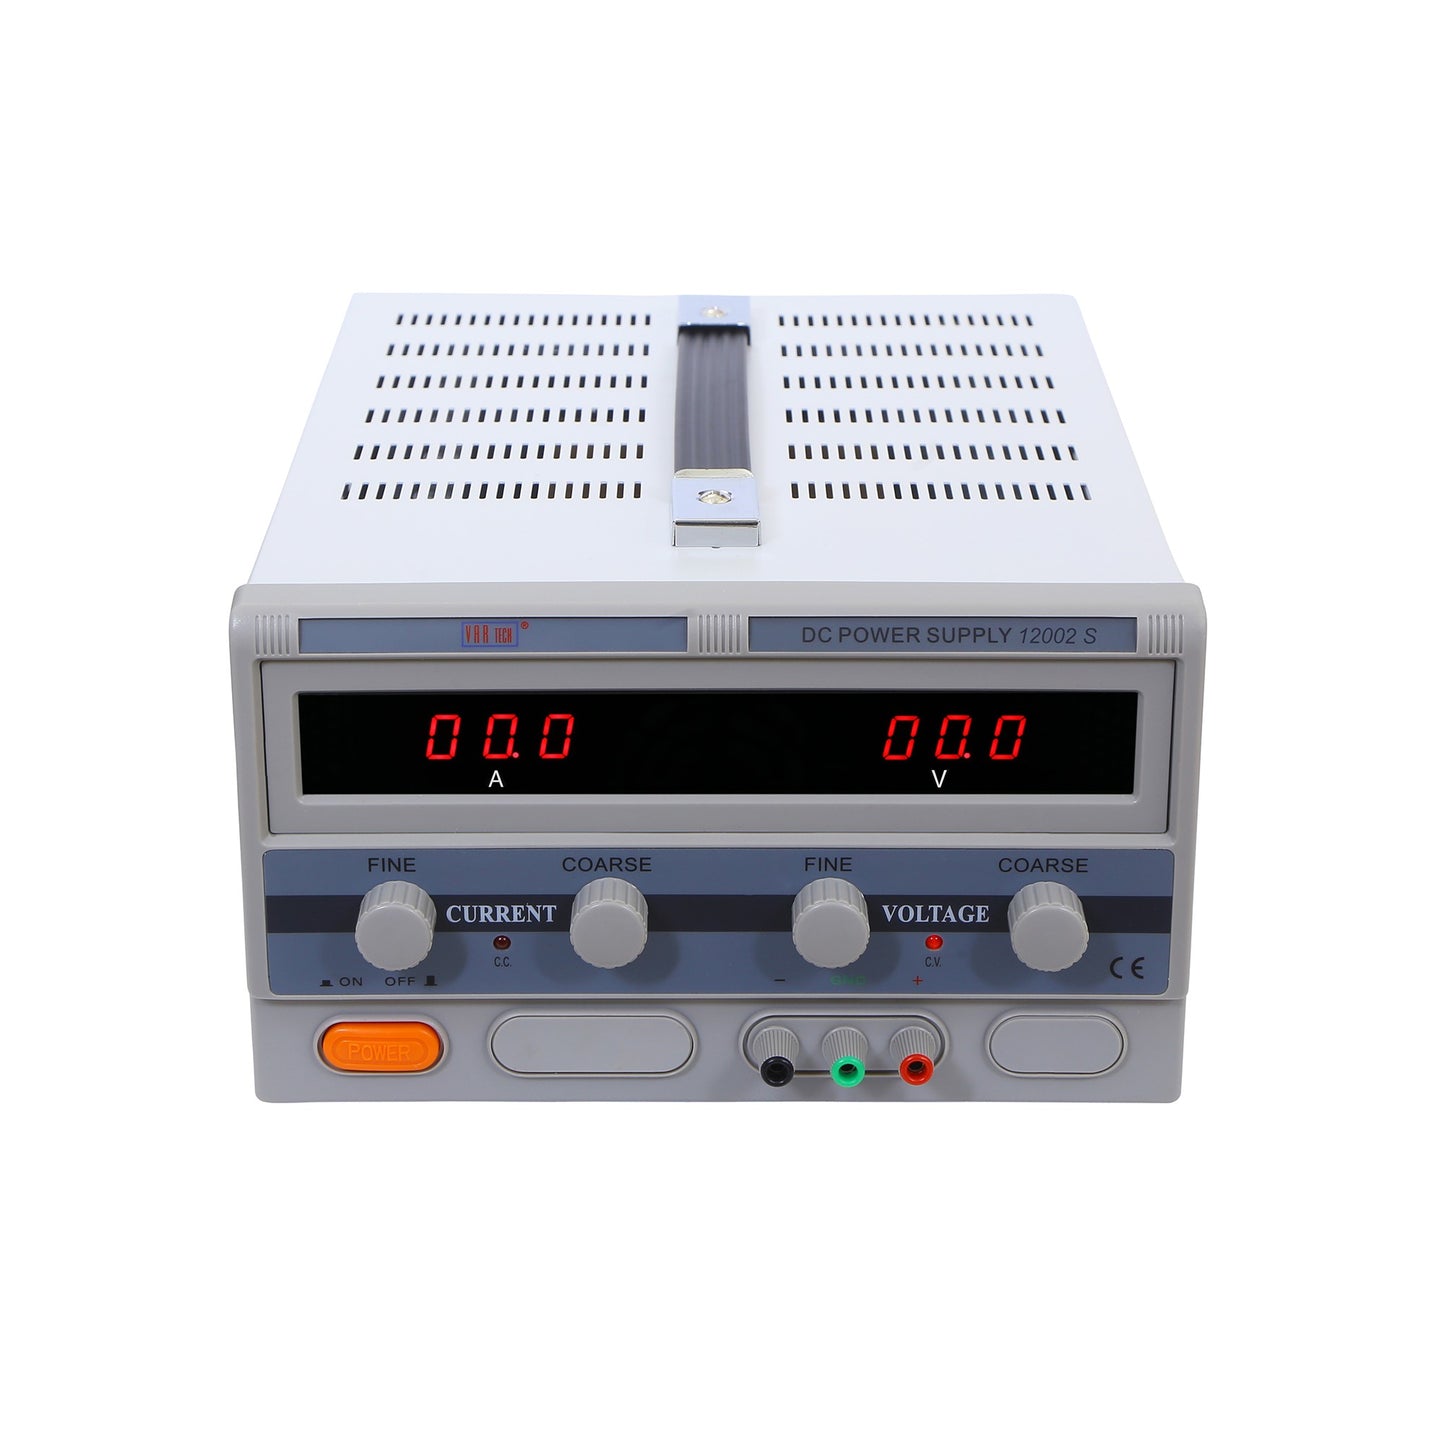 12002 S 120V 2A SMPS based DC regulated power supply